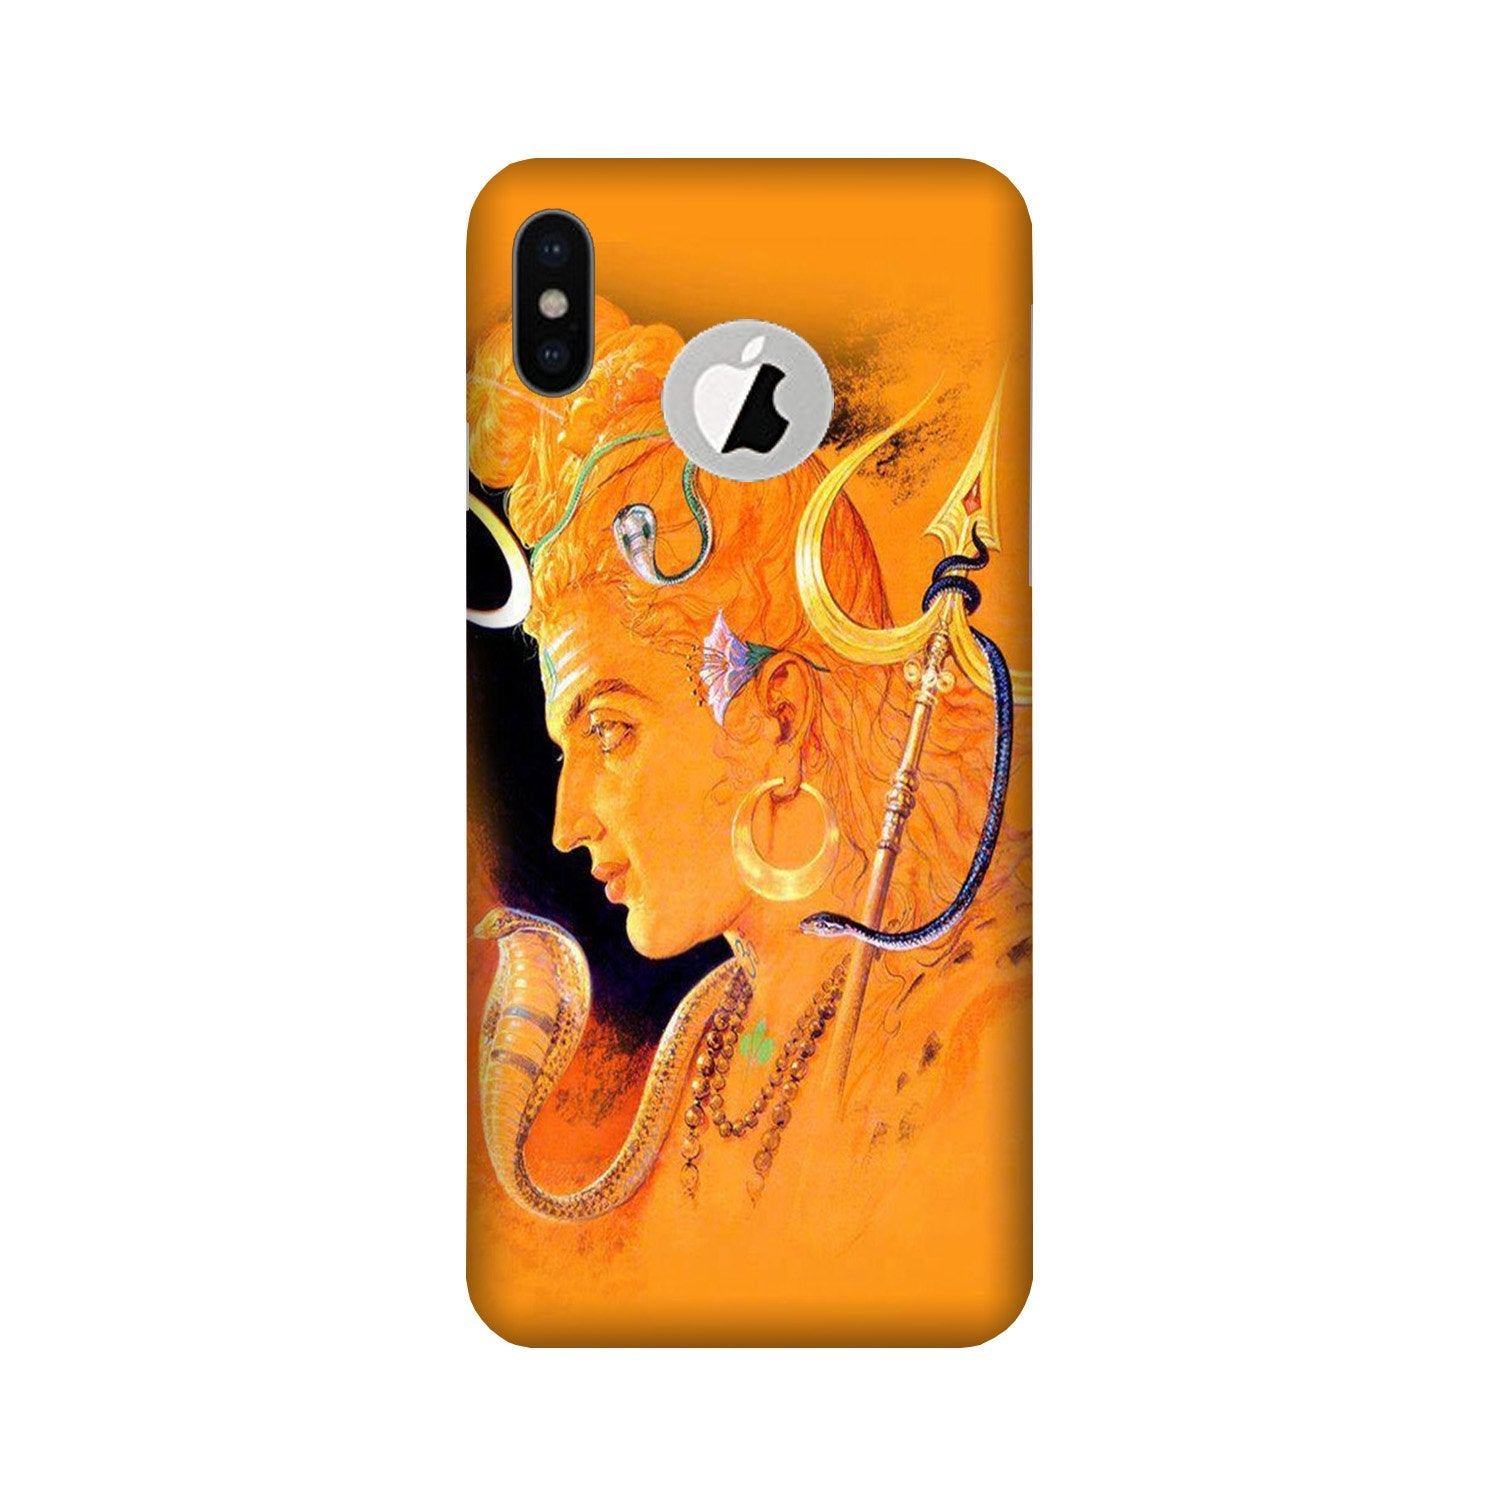 Lord Shiva Case for iPhone X logo cut (Design No. 293)